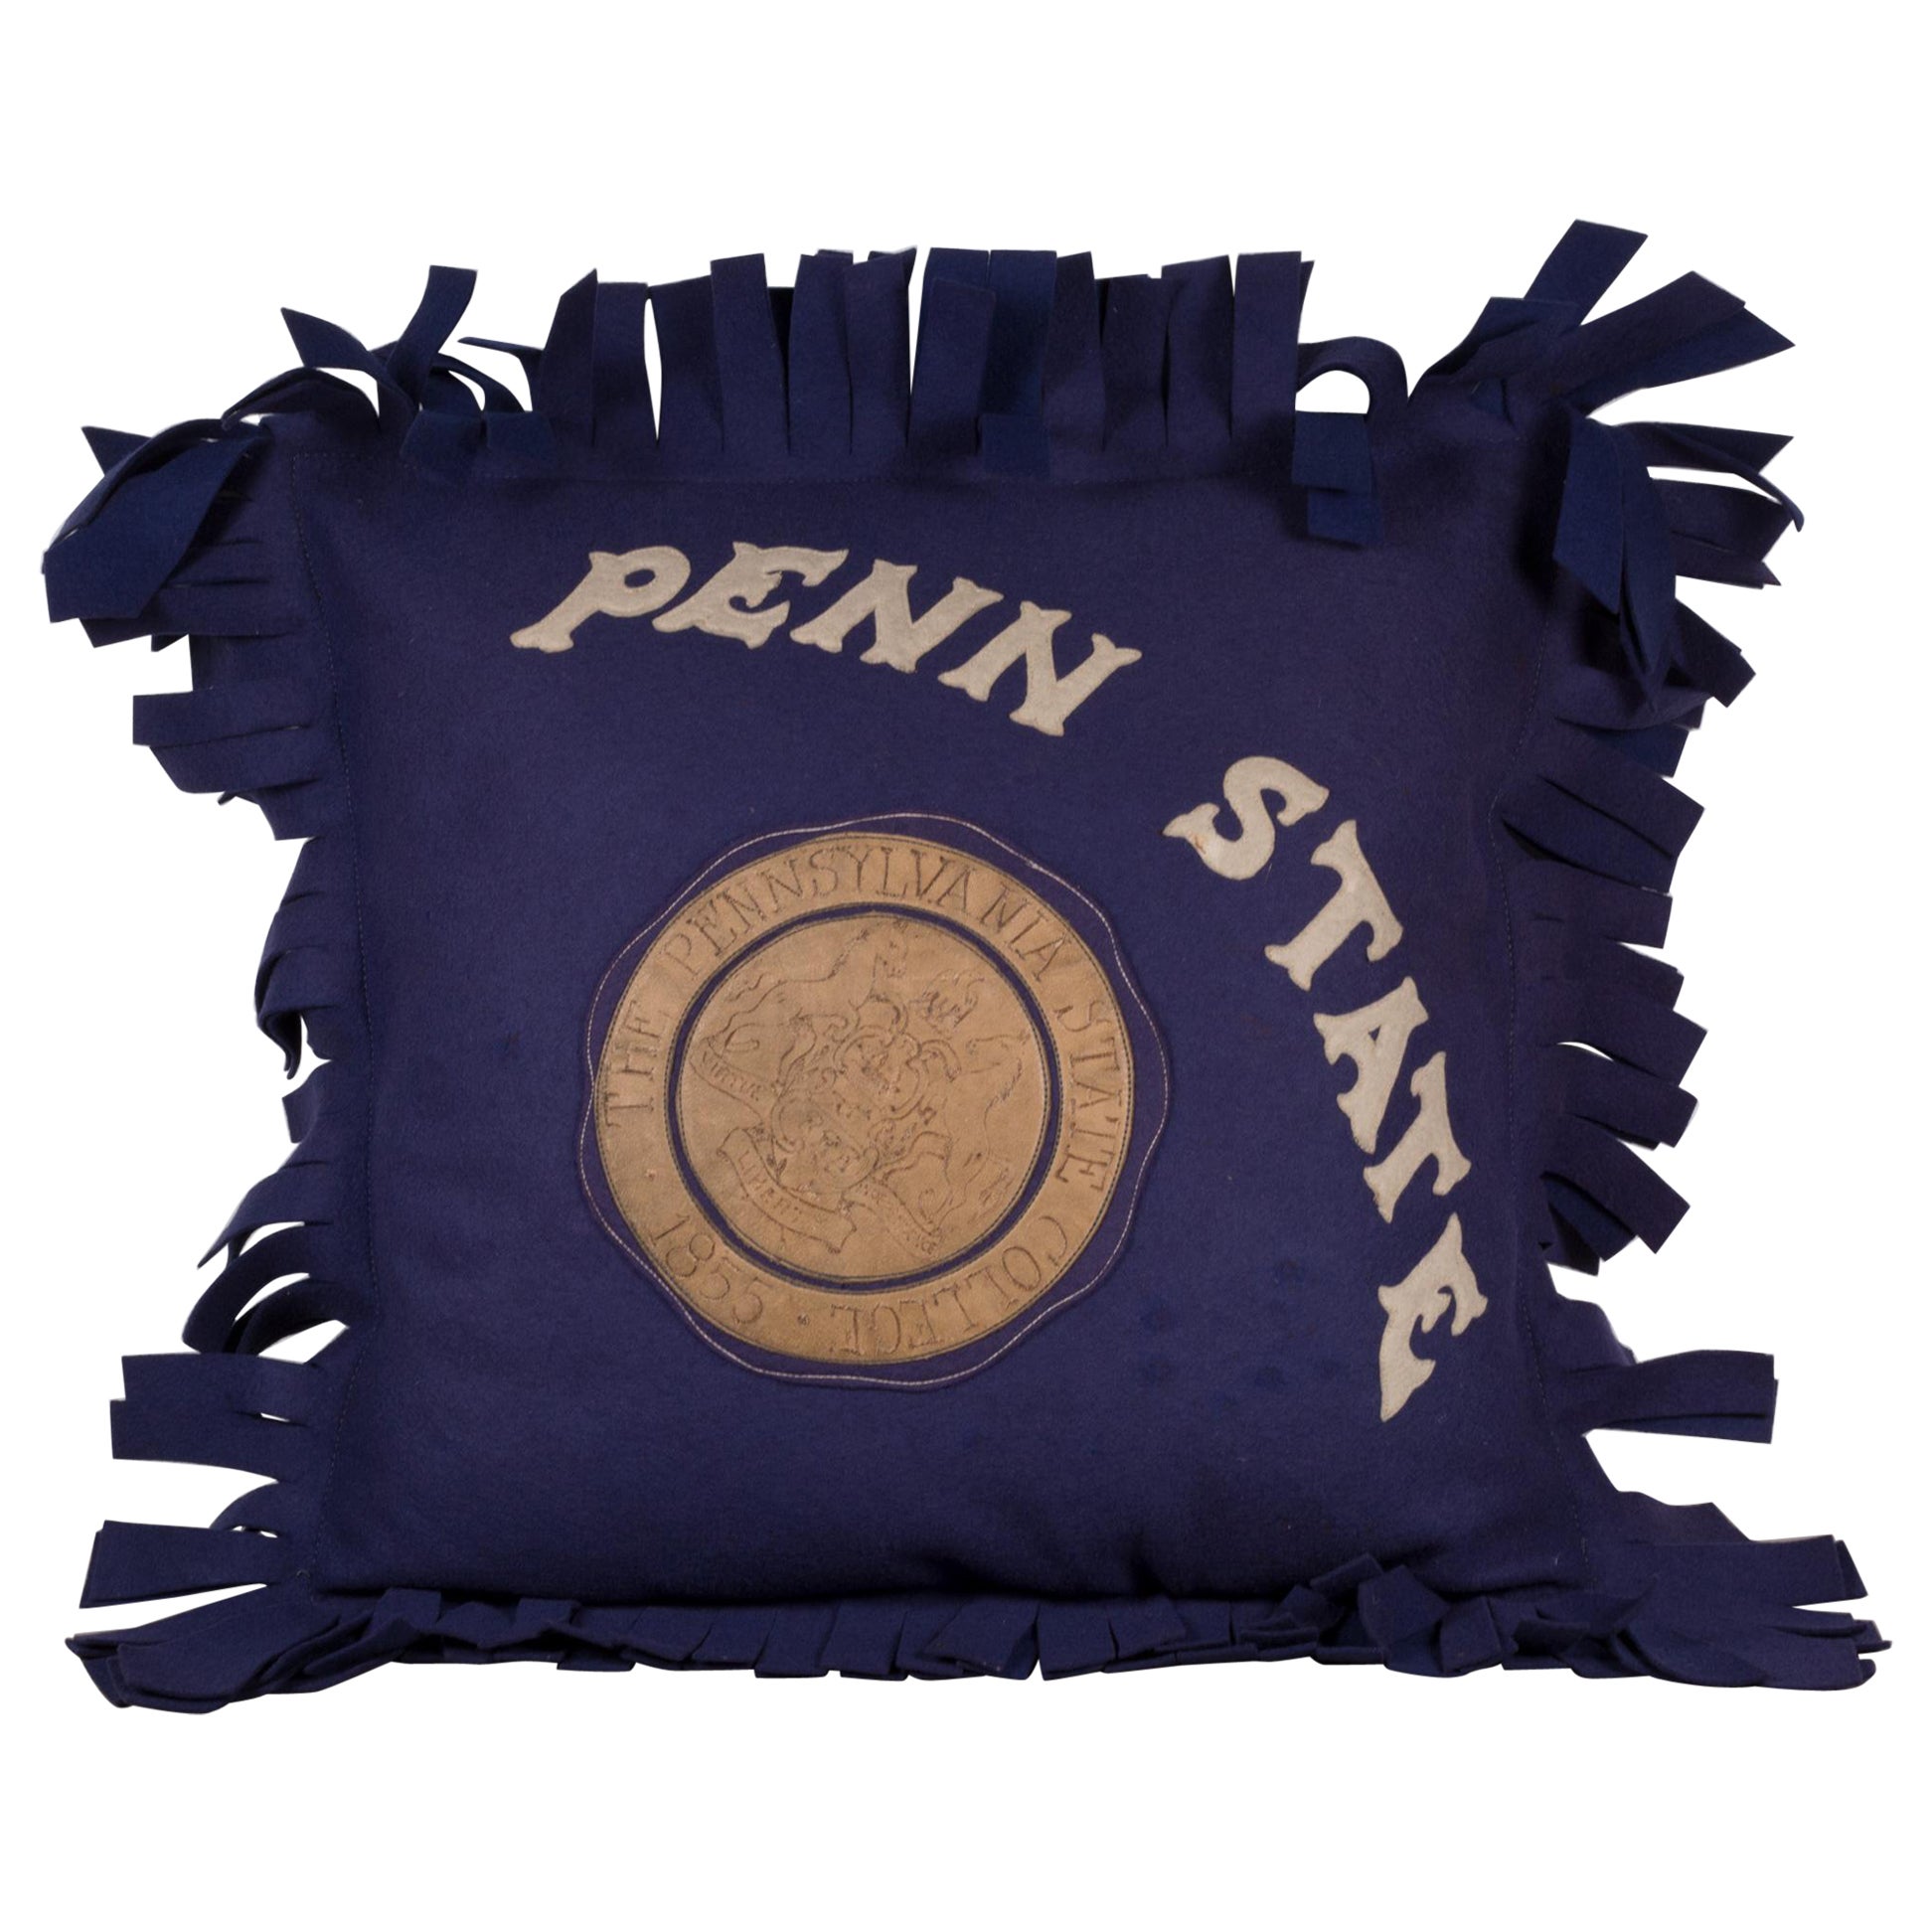 Vintage Penn State Pillow c.1940 For Sale